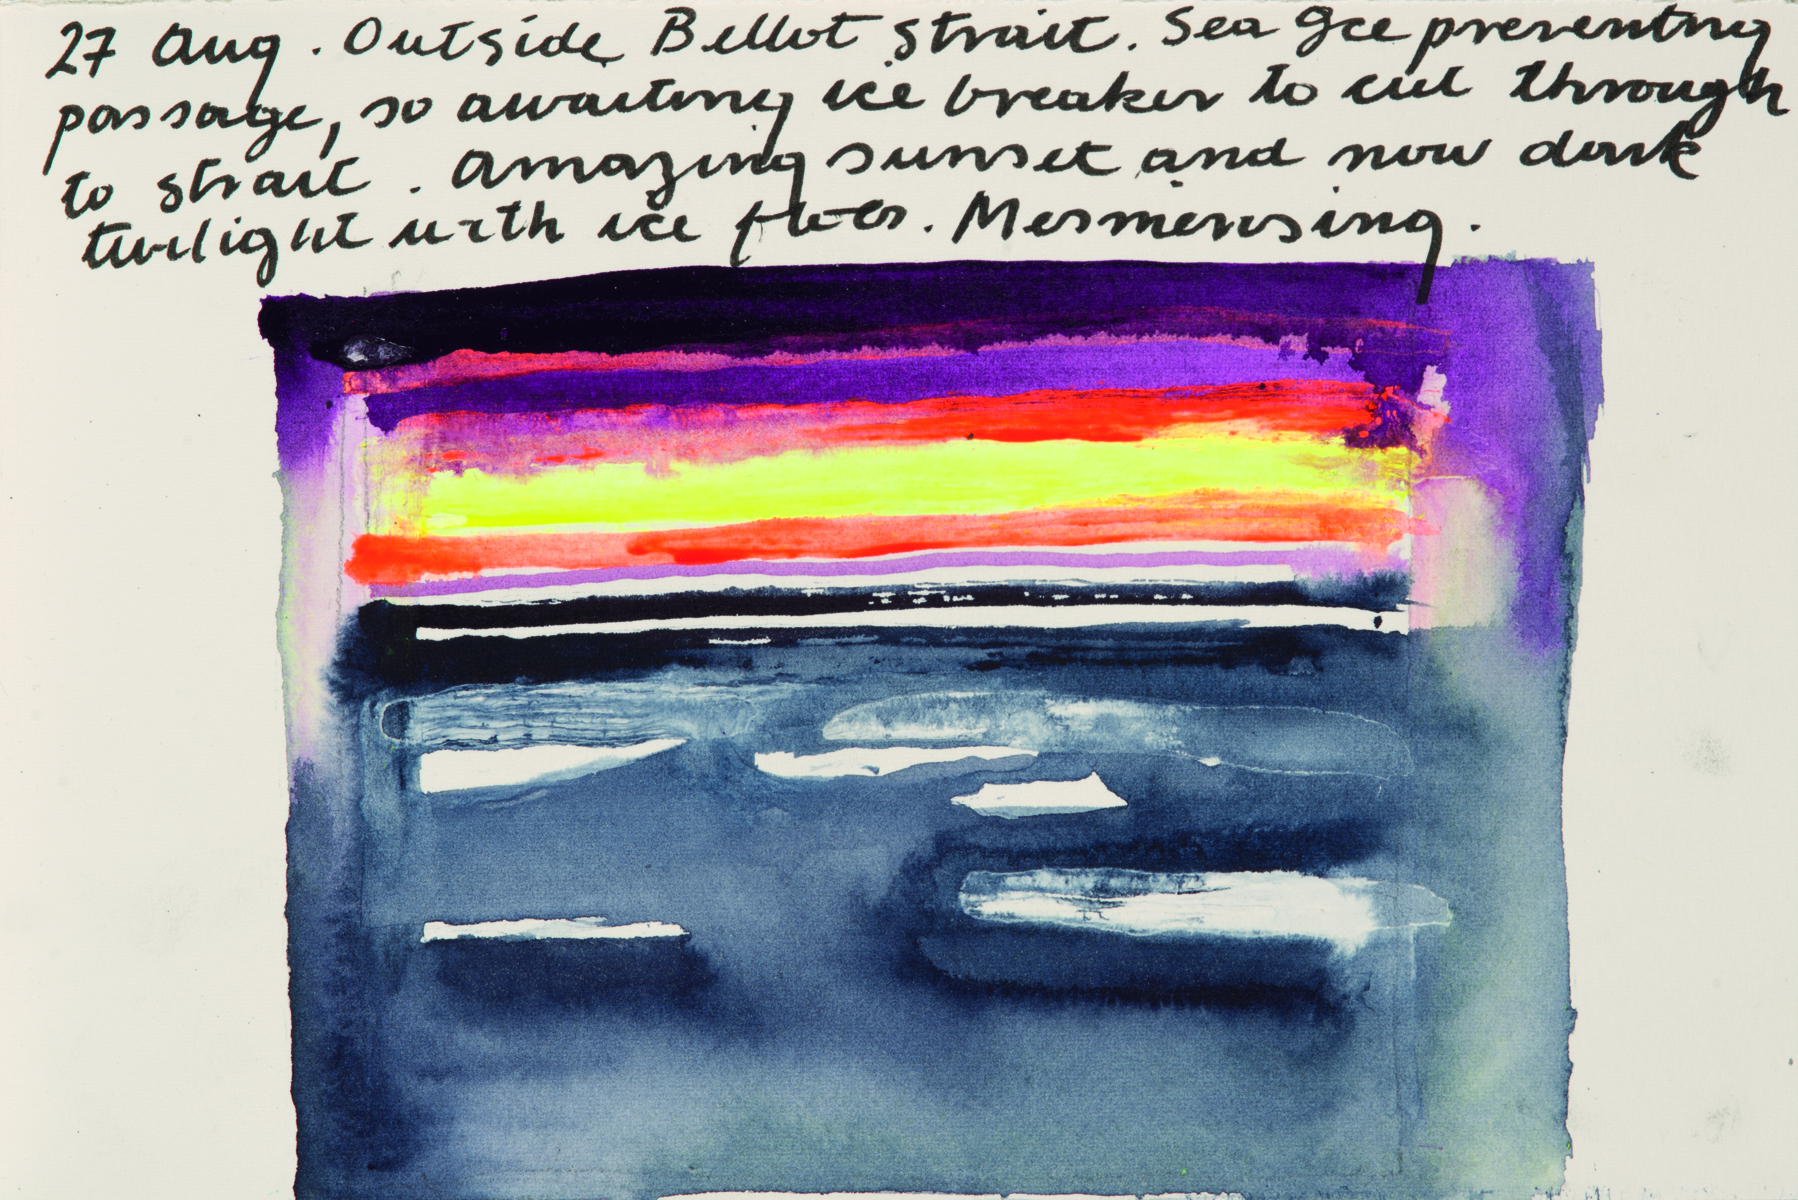 Sketched painting of artic landscape in blue and white, Barbara Rae artic sketchbooks in pale blue font to right